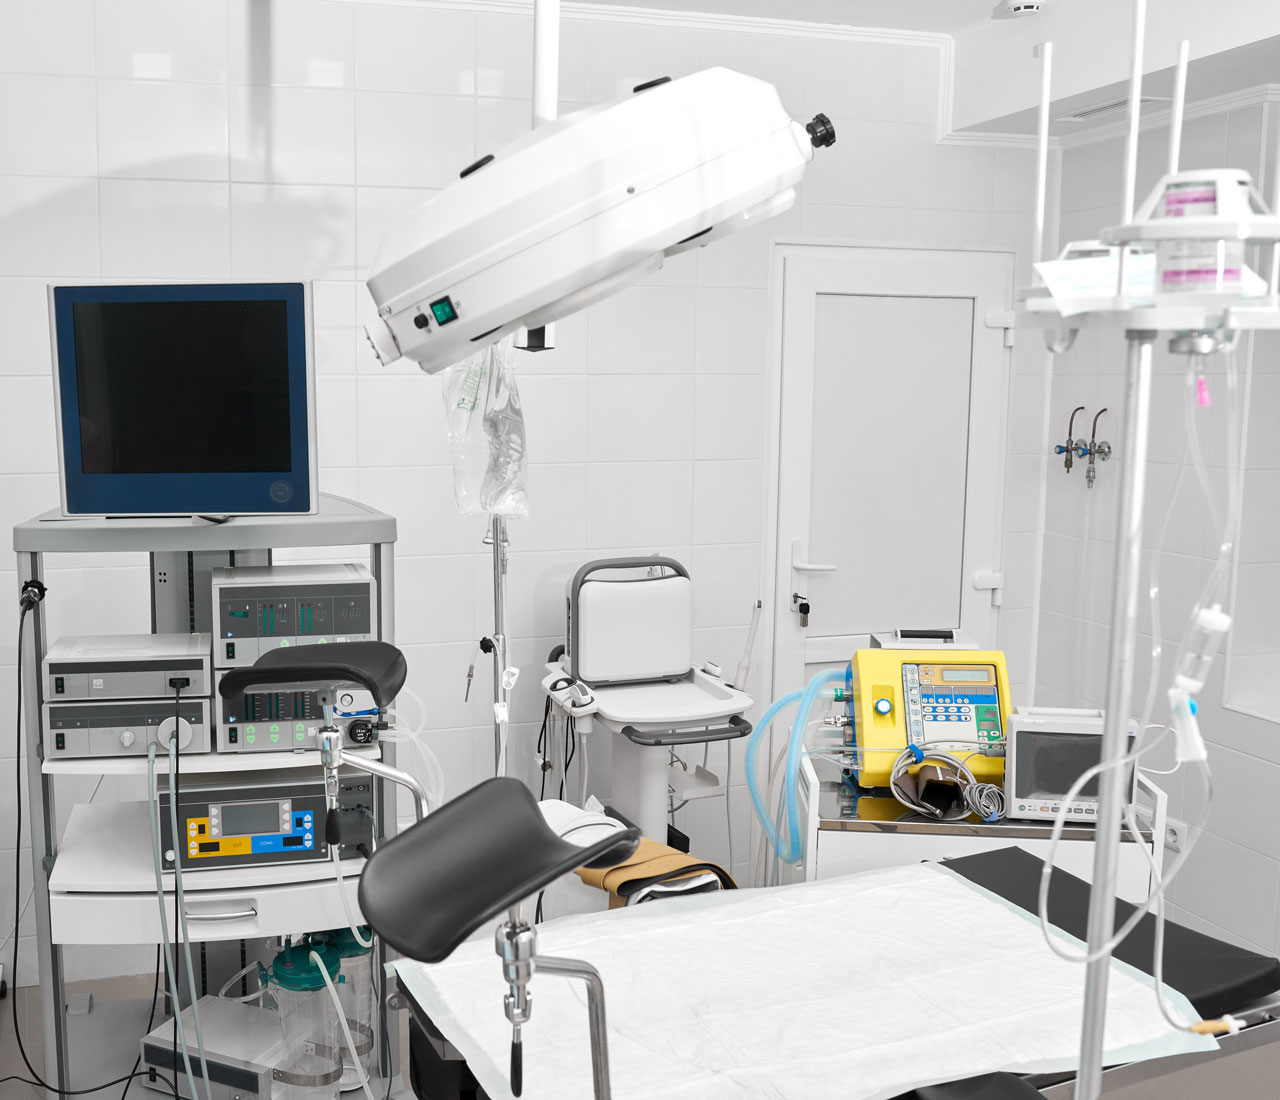 Surgical Room Equipment